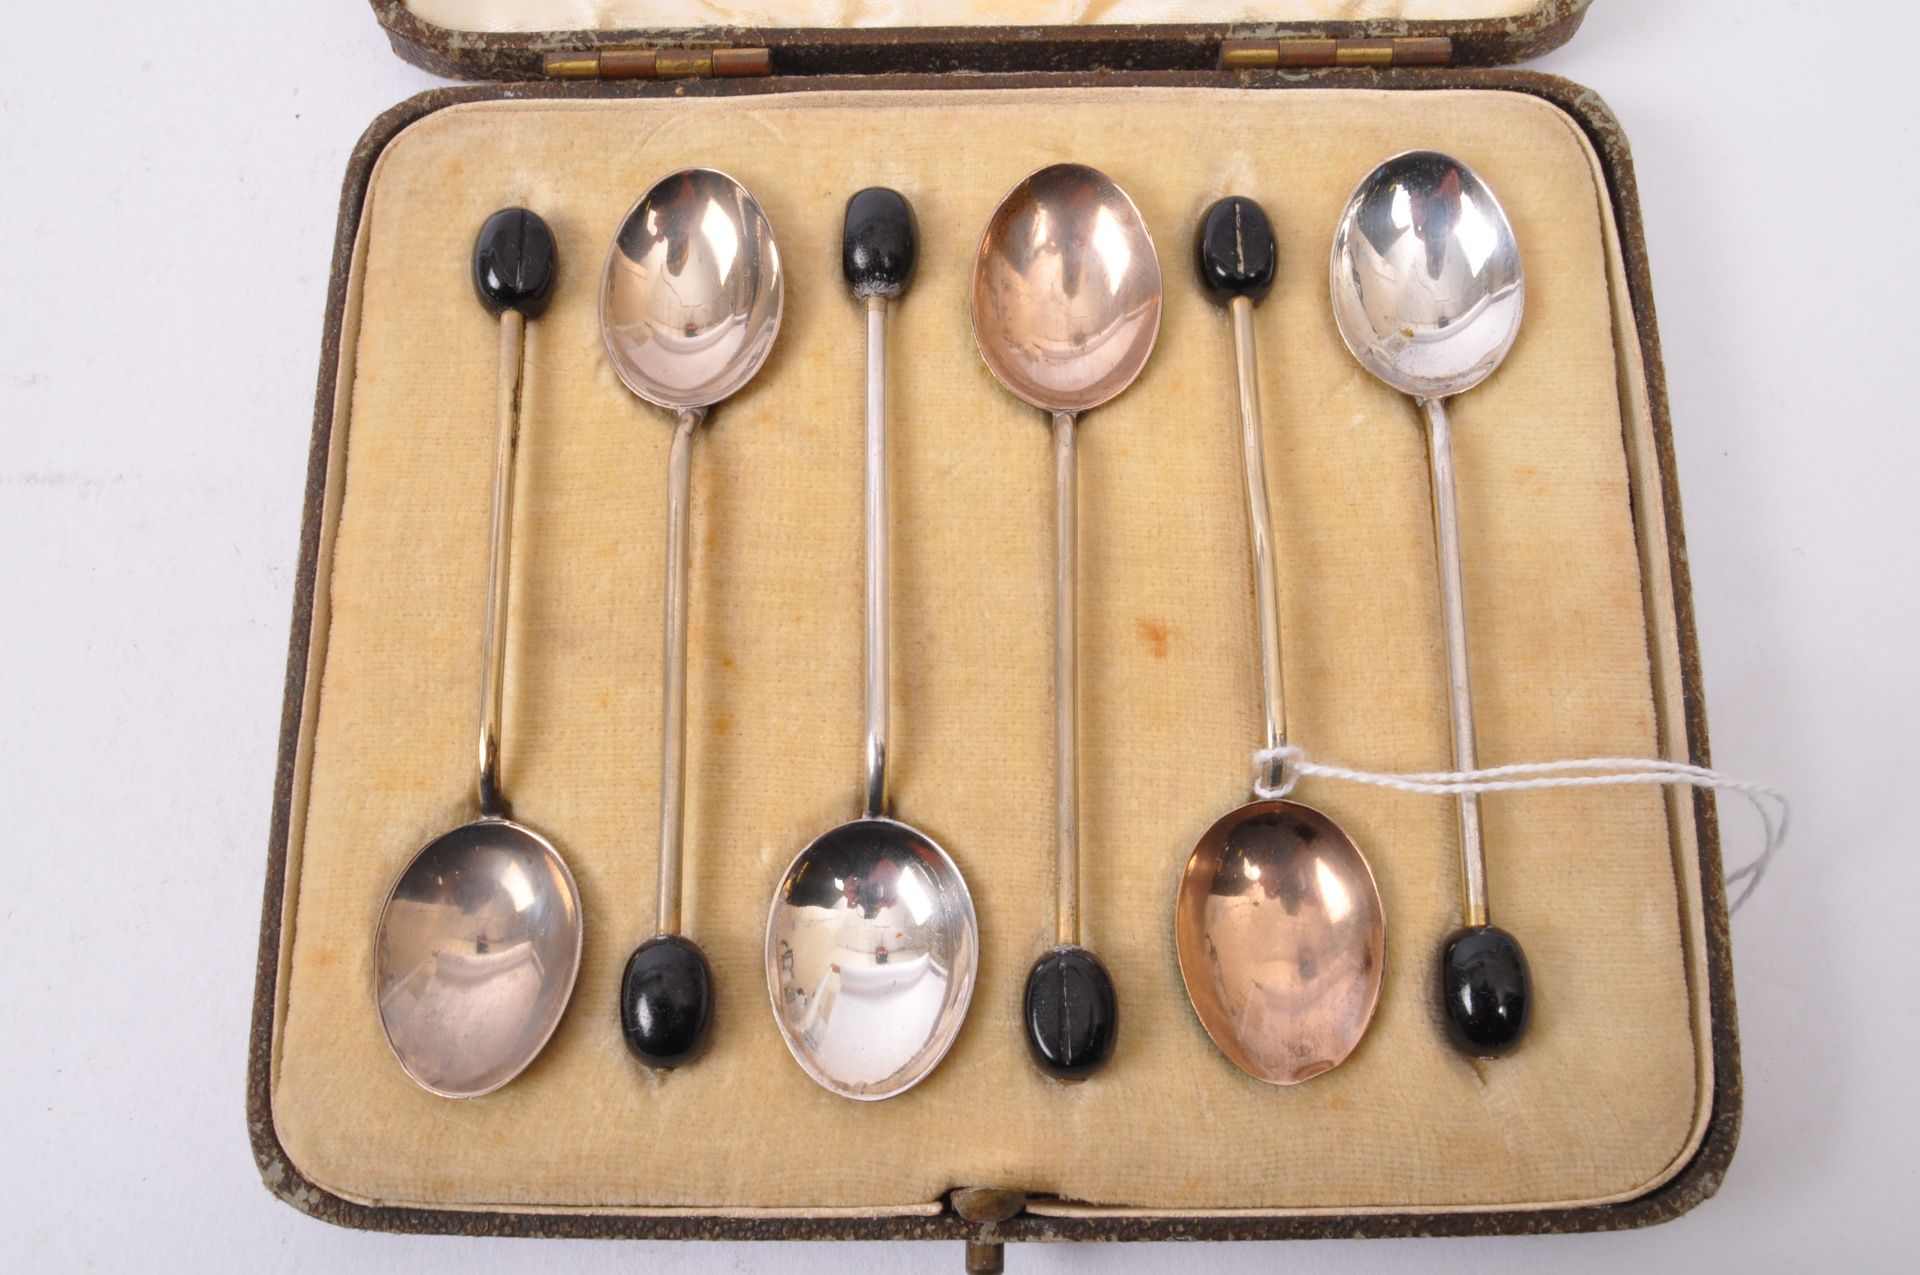 SIX MID 20TH CENTURY ENAMELLED SILVER PLATE SPOONS - HARRODS